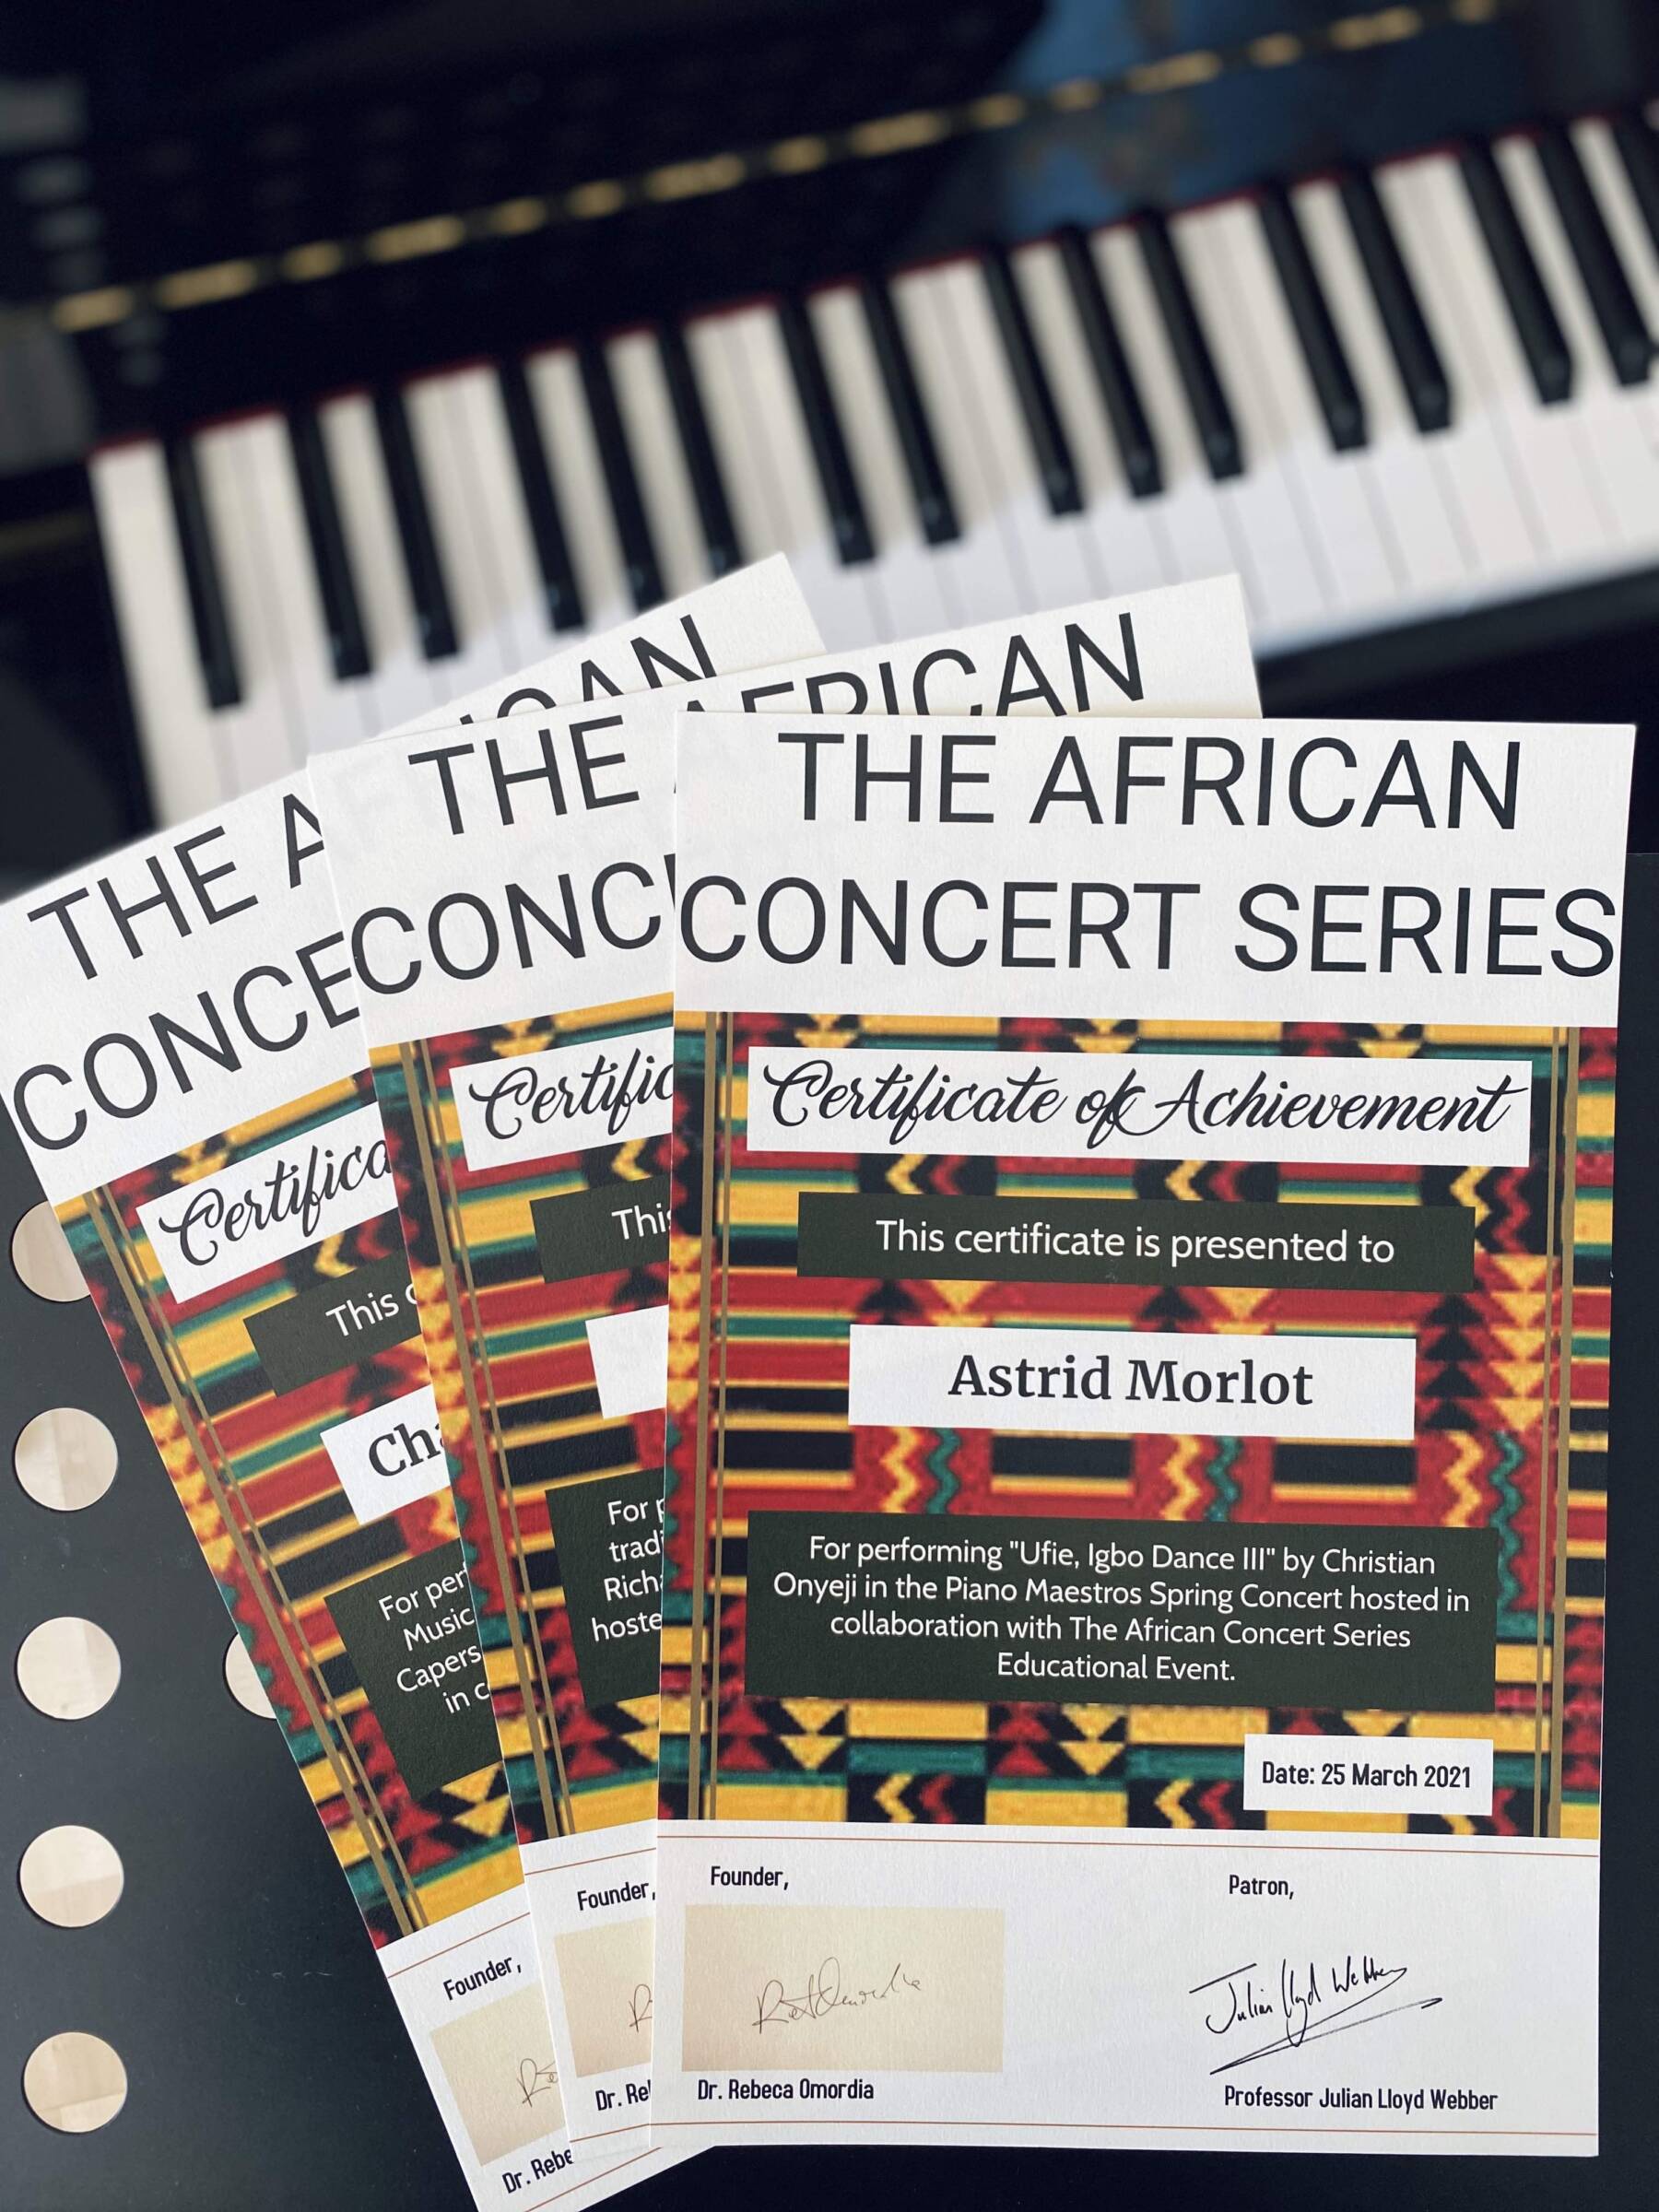 Concert pianist Rebeca Omordia, founder of the African Concert Series London, visited our Spring Concert to tell us about African culture through its music.